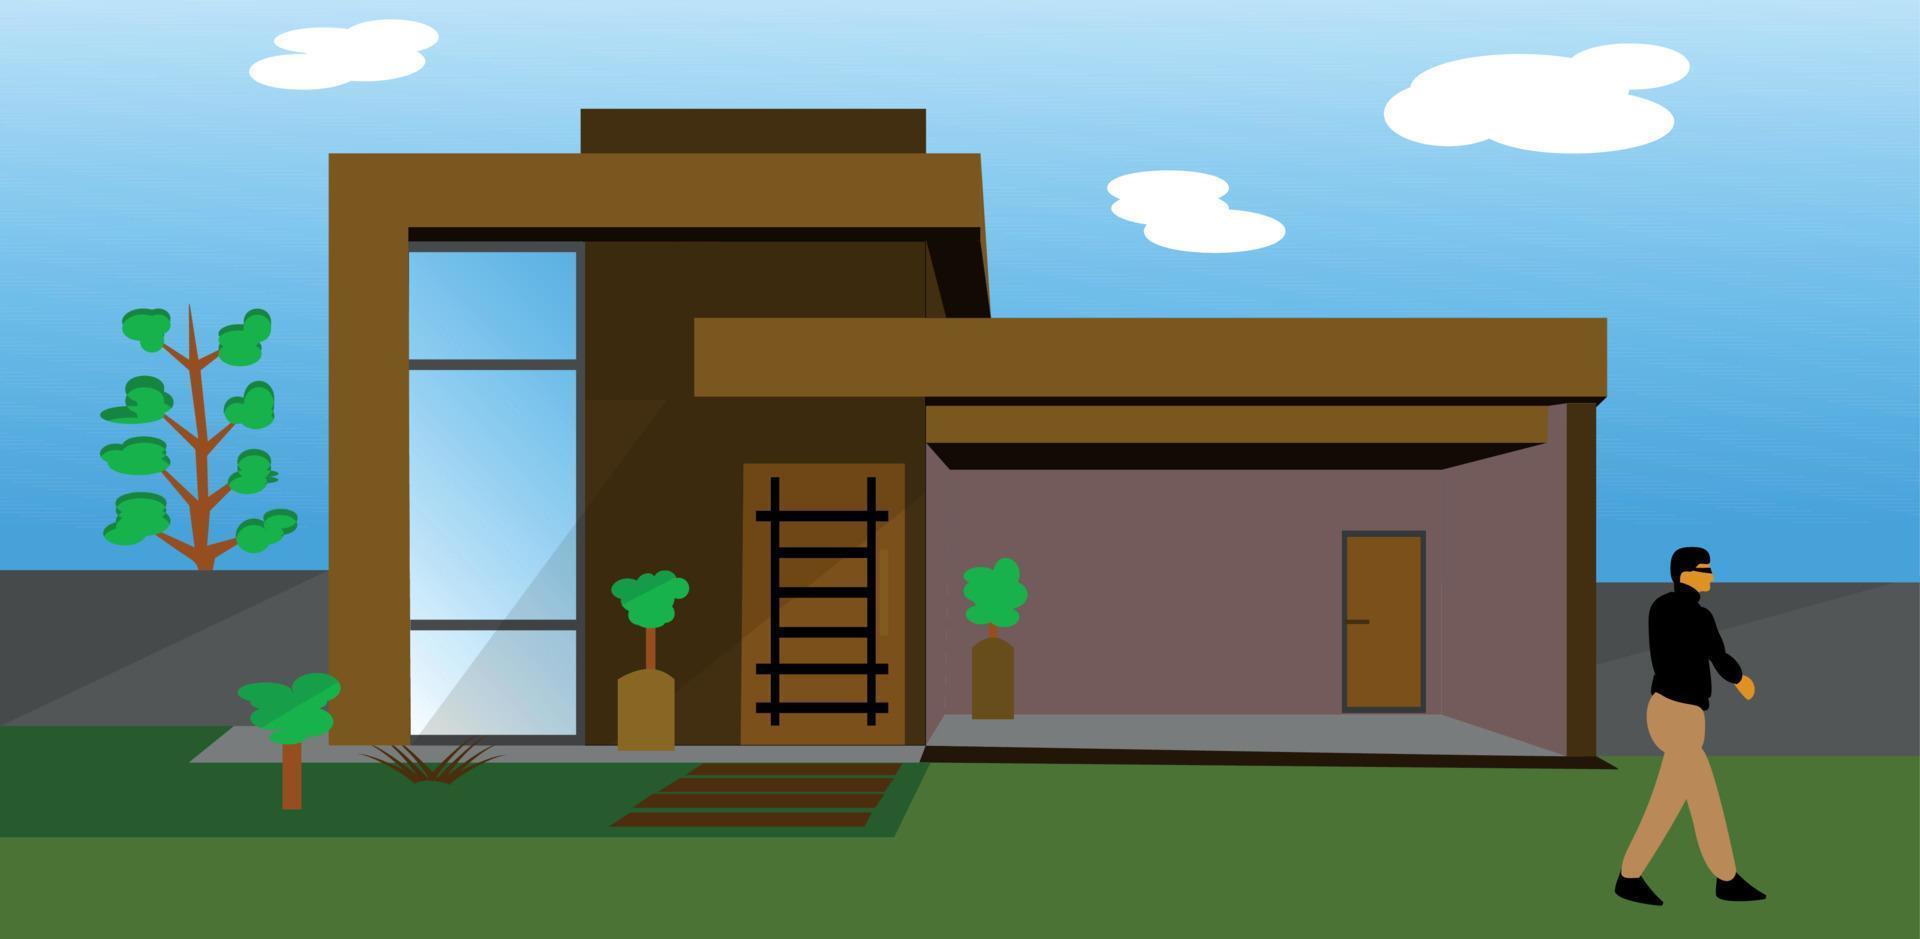 Modern House on Grass With Blue Sky With White Clouds vector